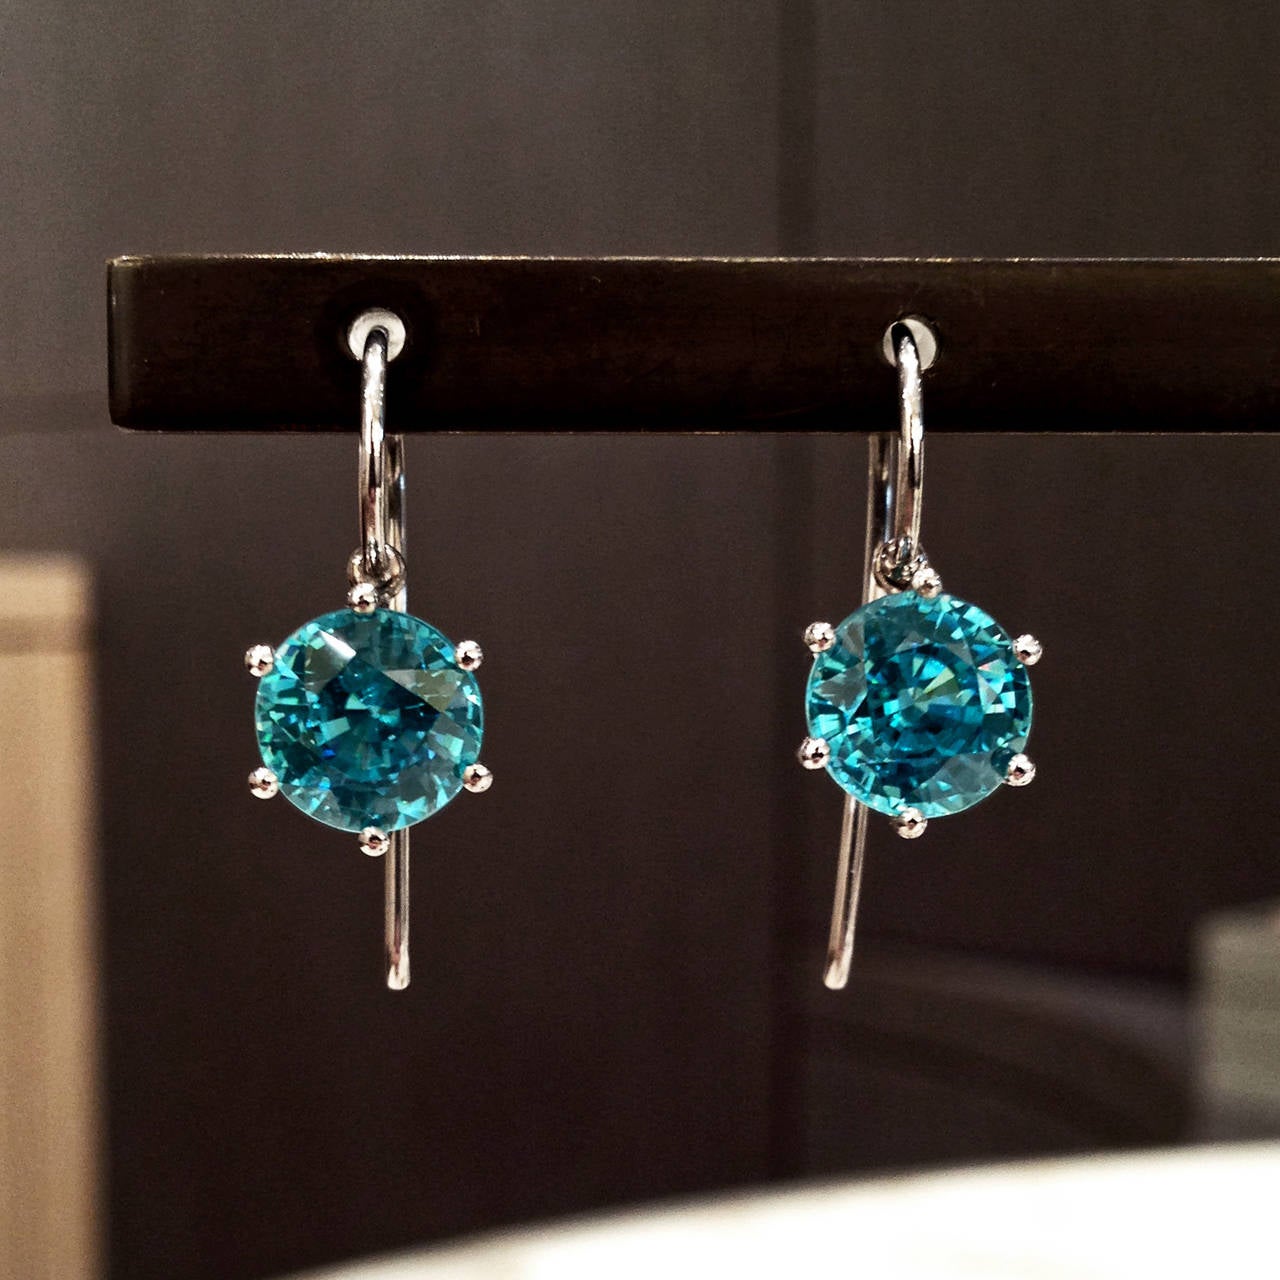 One-of-a-Kind Princess Earrings handcrafted in 18k white gold with a matched pair of spectacular 8mm blue zircon totaling 15.54 carats.